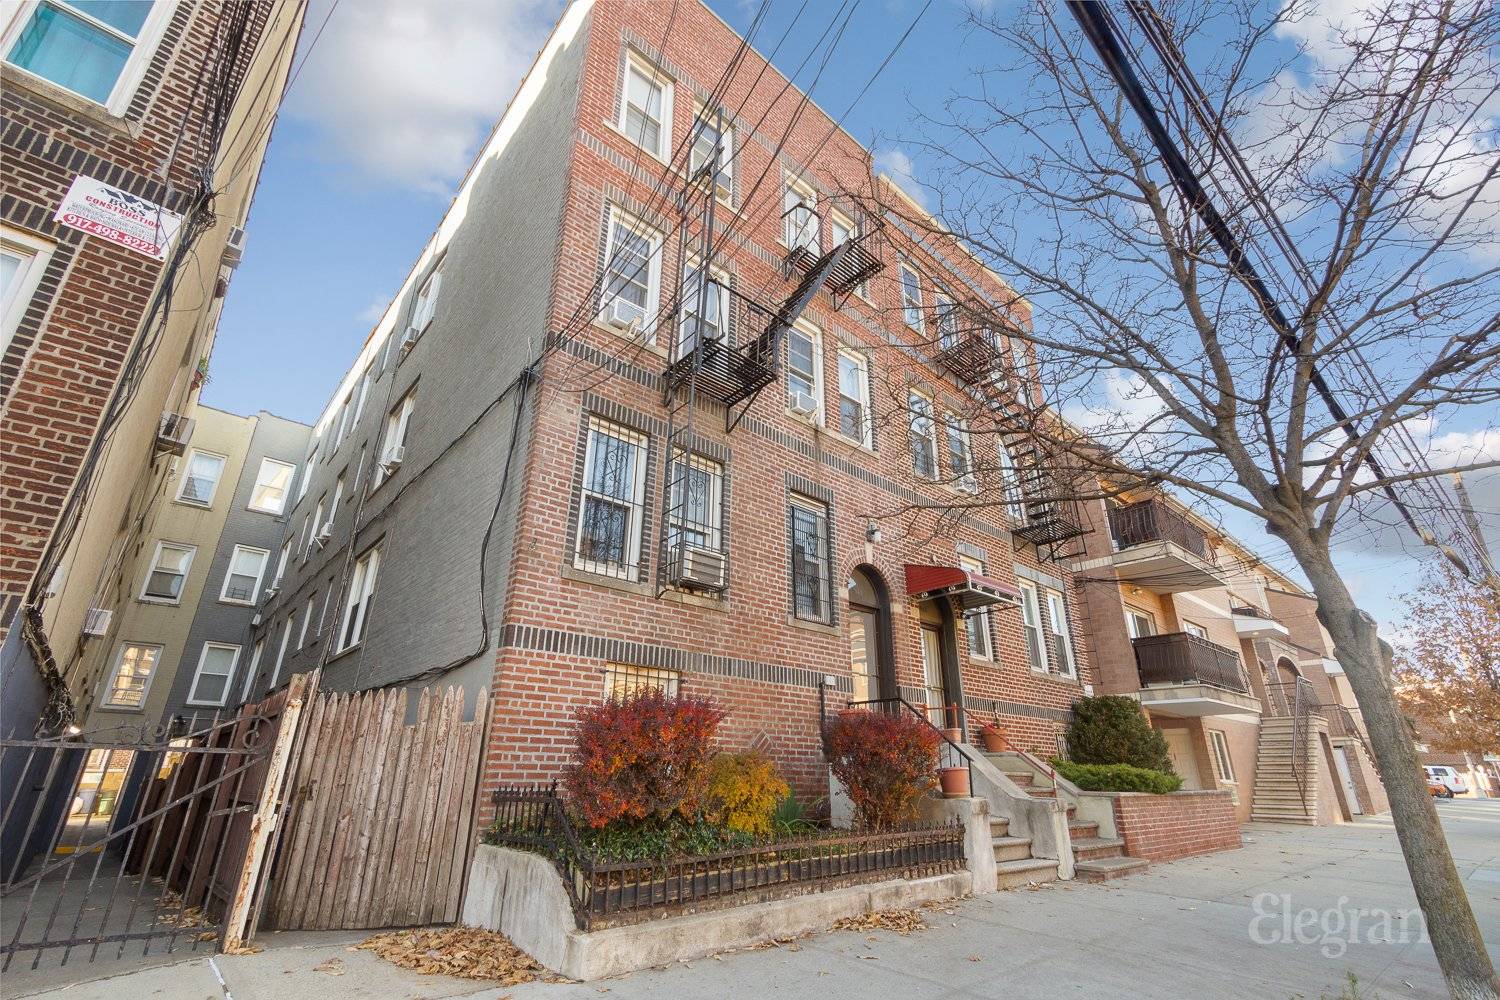 This is a multi family brick townhome located in Pelham Bay.